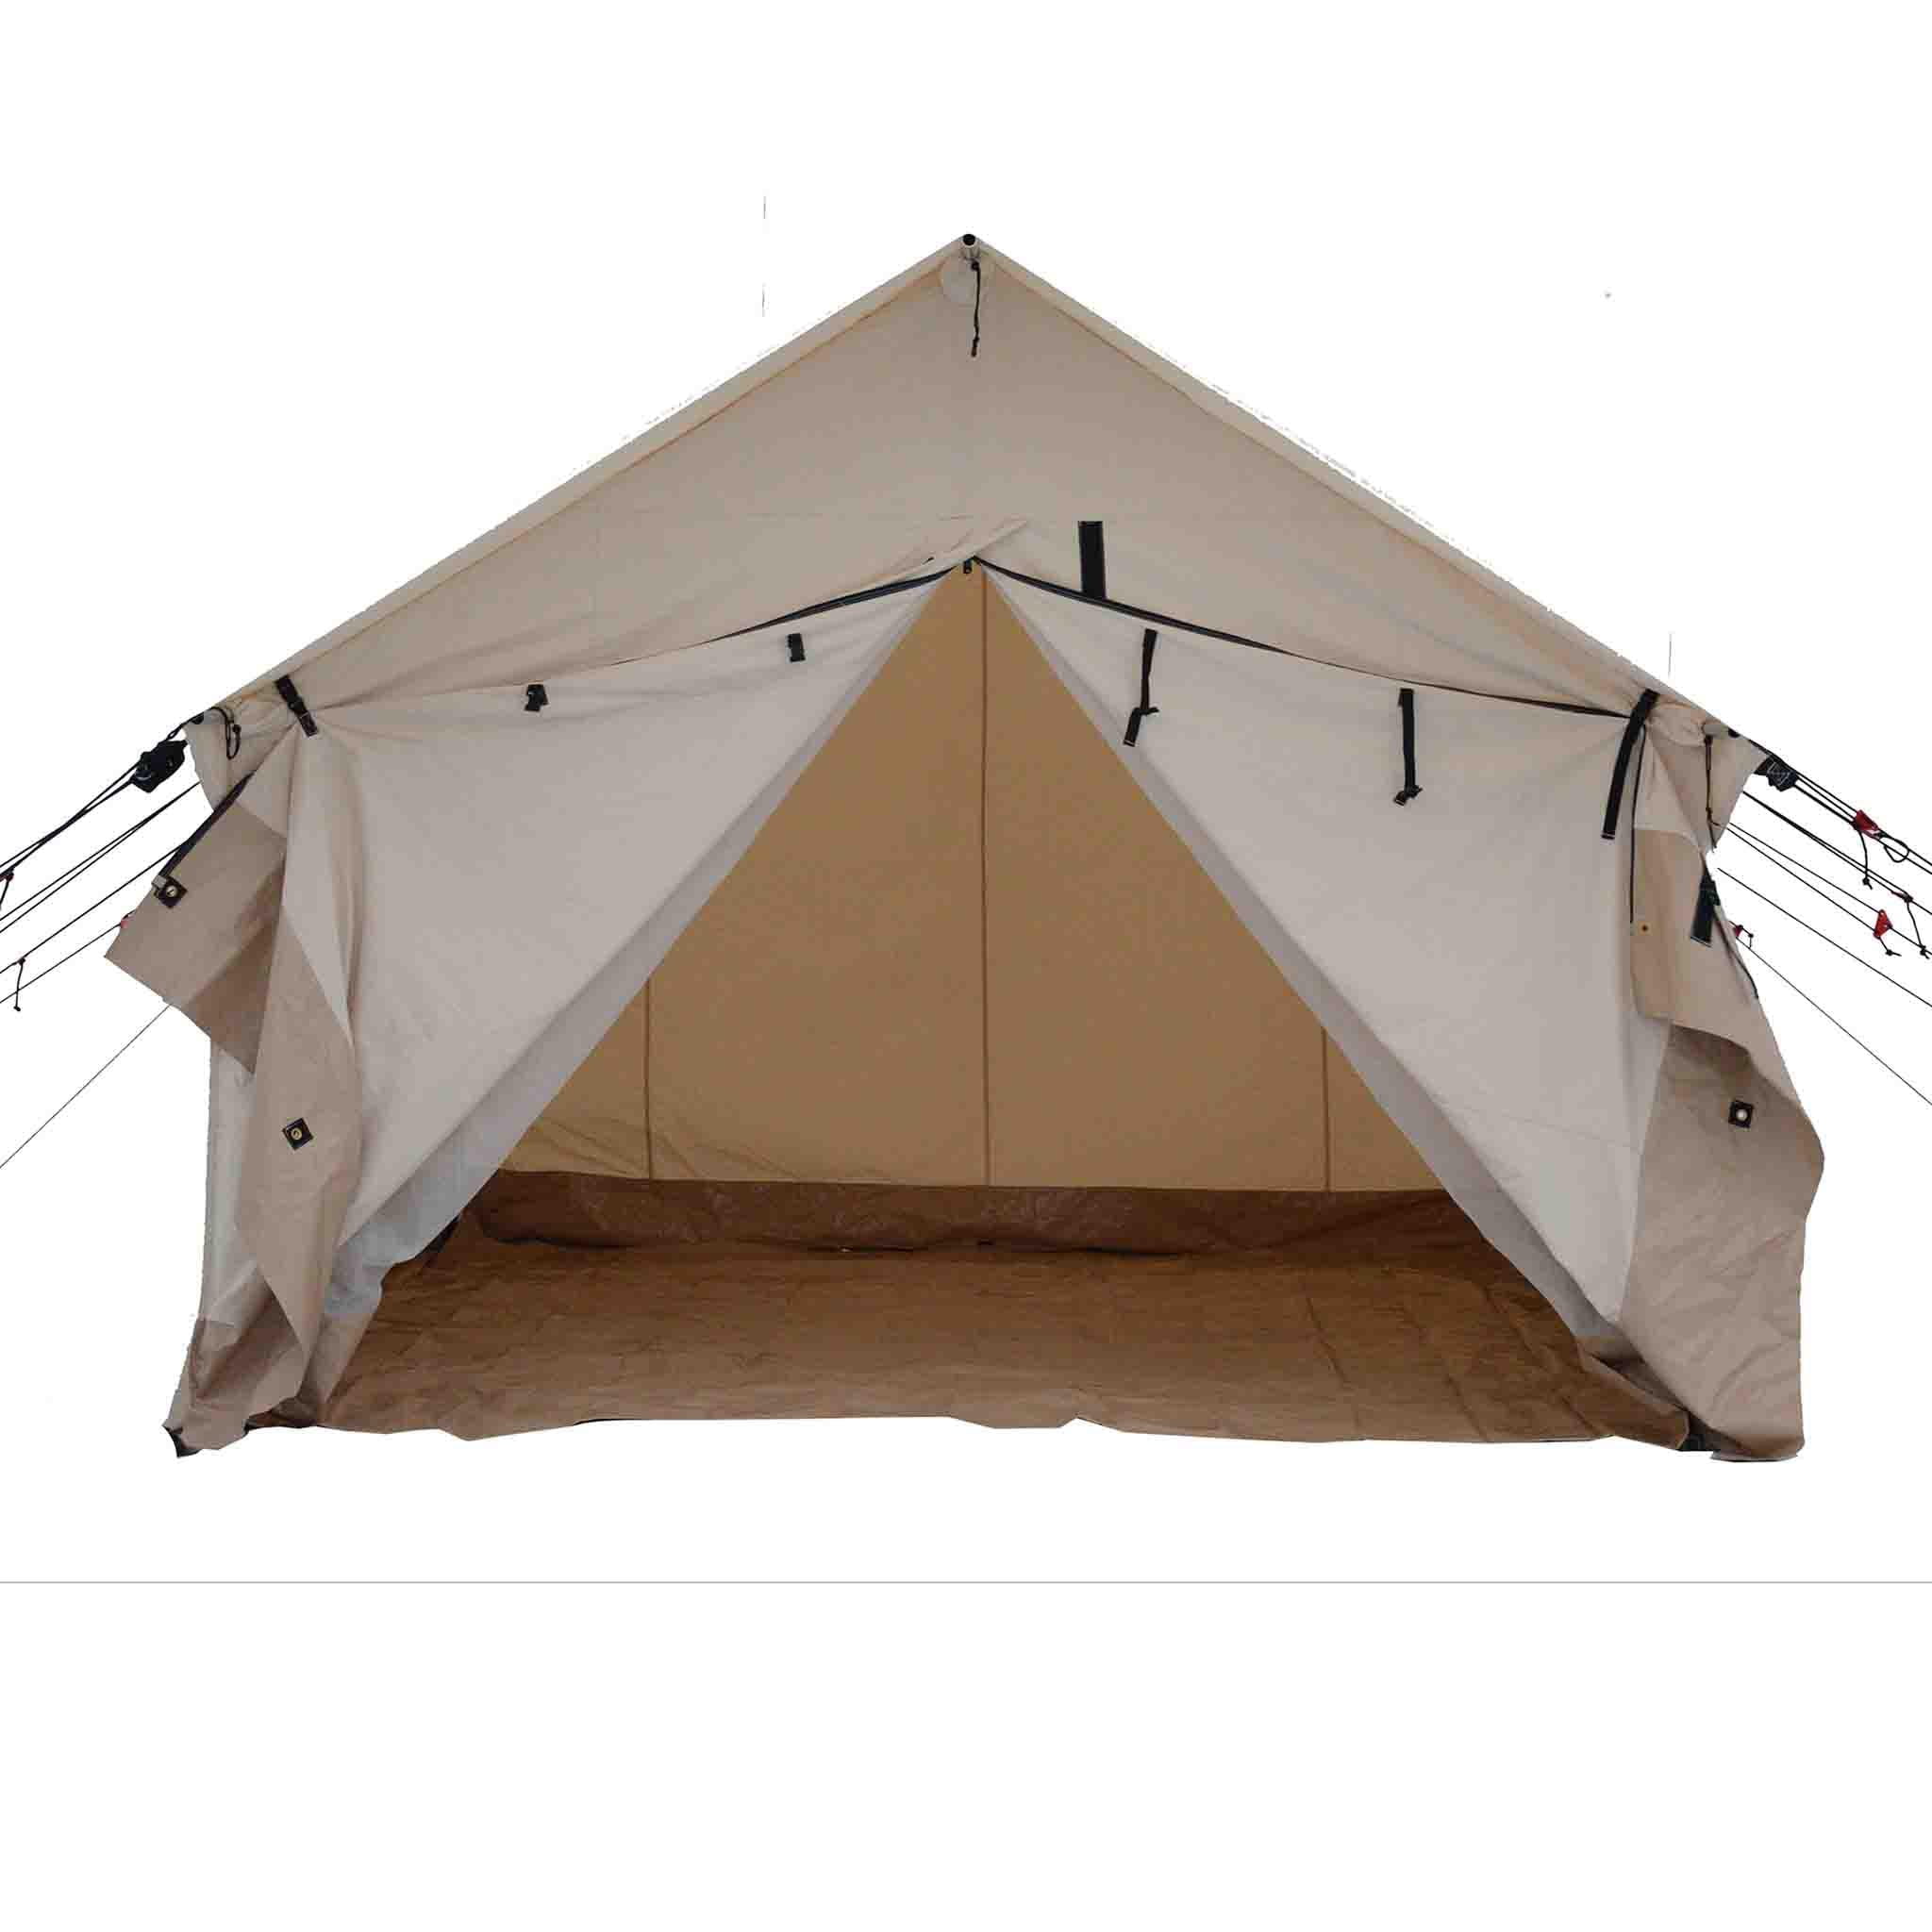 WHITEDUCK Alpha Canvas Tent – Waterproof 4 Season Outdoor Camping & Hunting w/Heavy Aluminum Frame & PVC Floor for Large Groups Families & Outfitters - Walmart.com